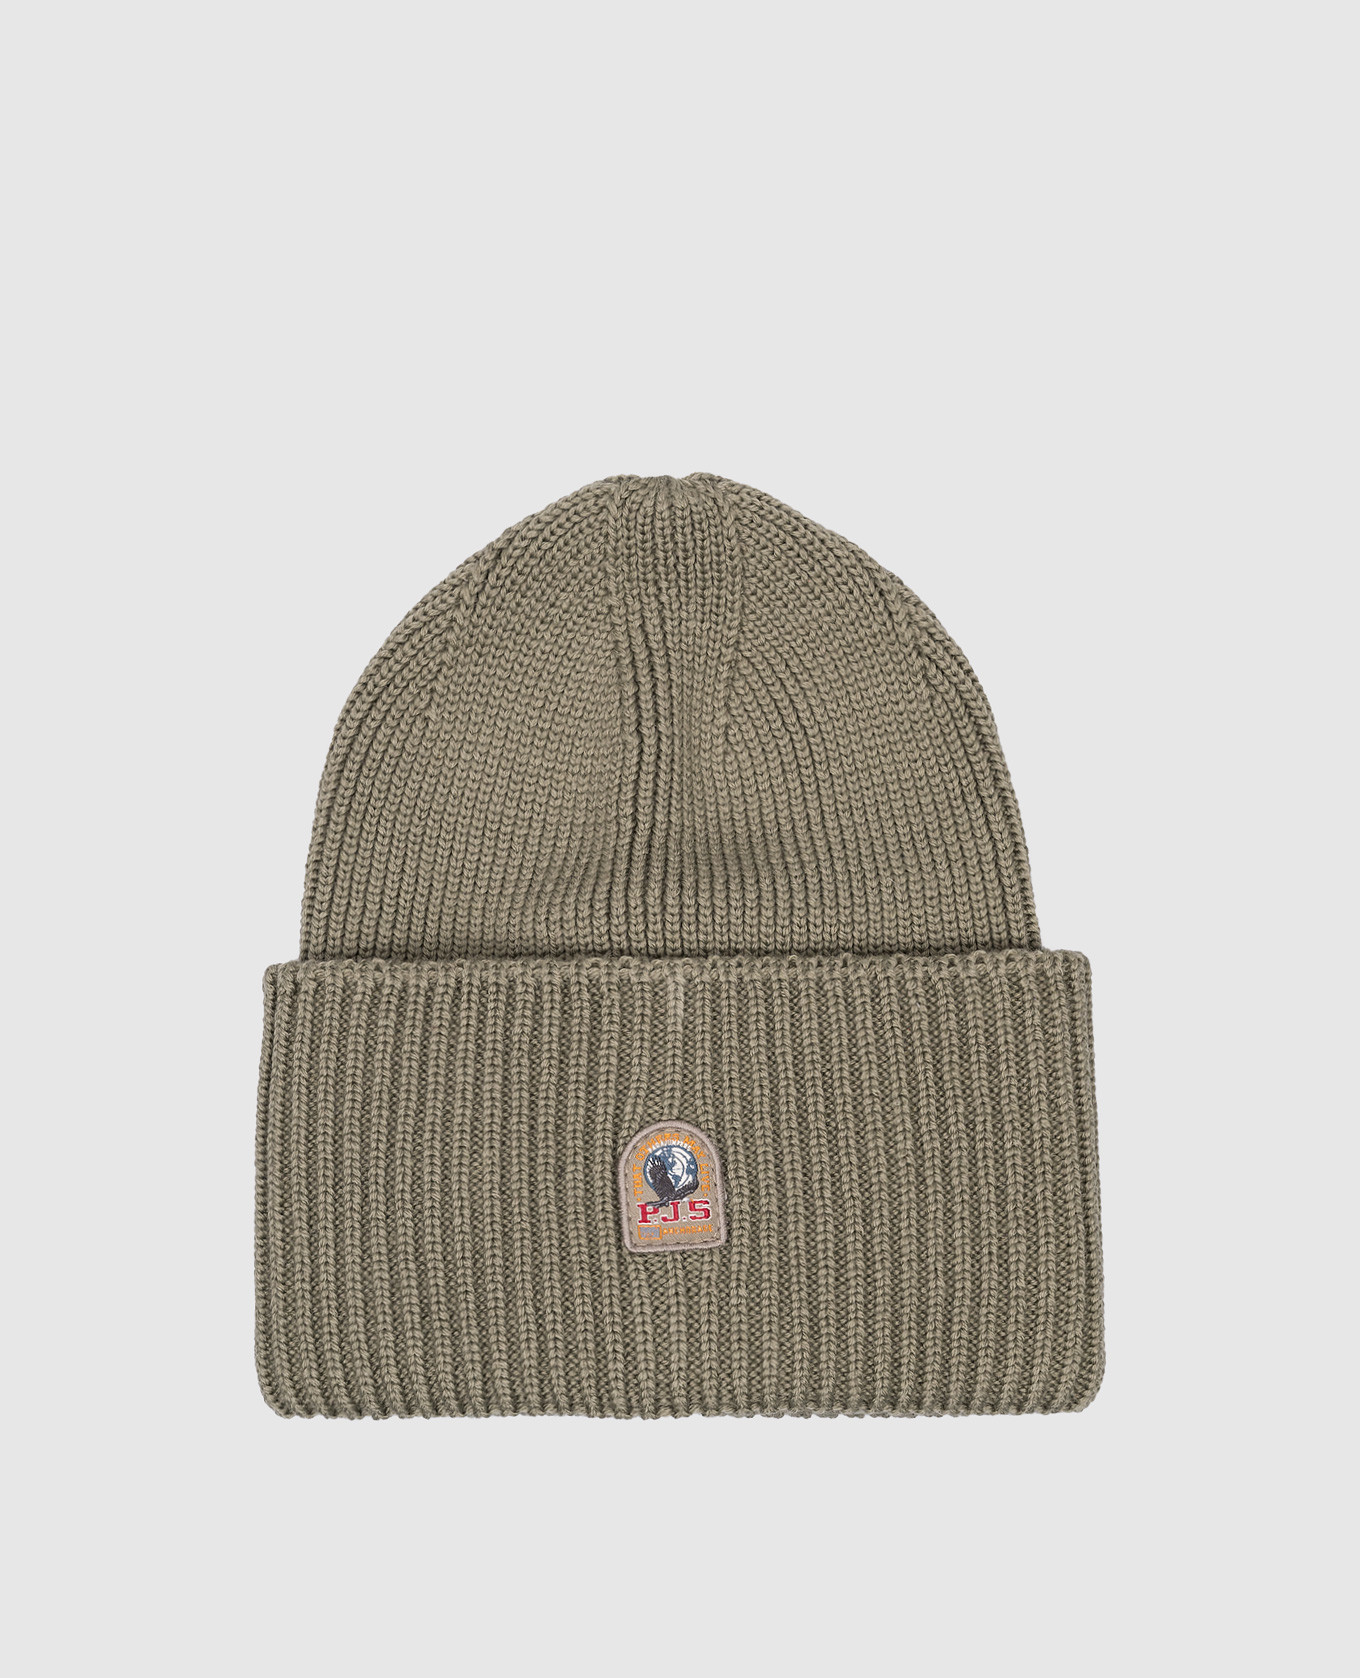 Basic cap in khaki wool with logo patch